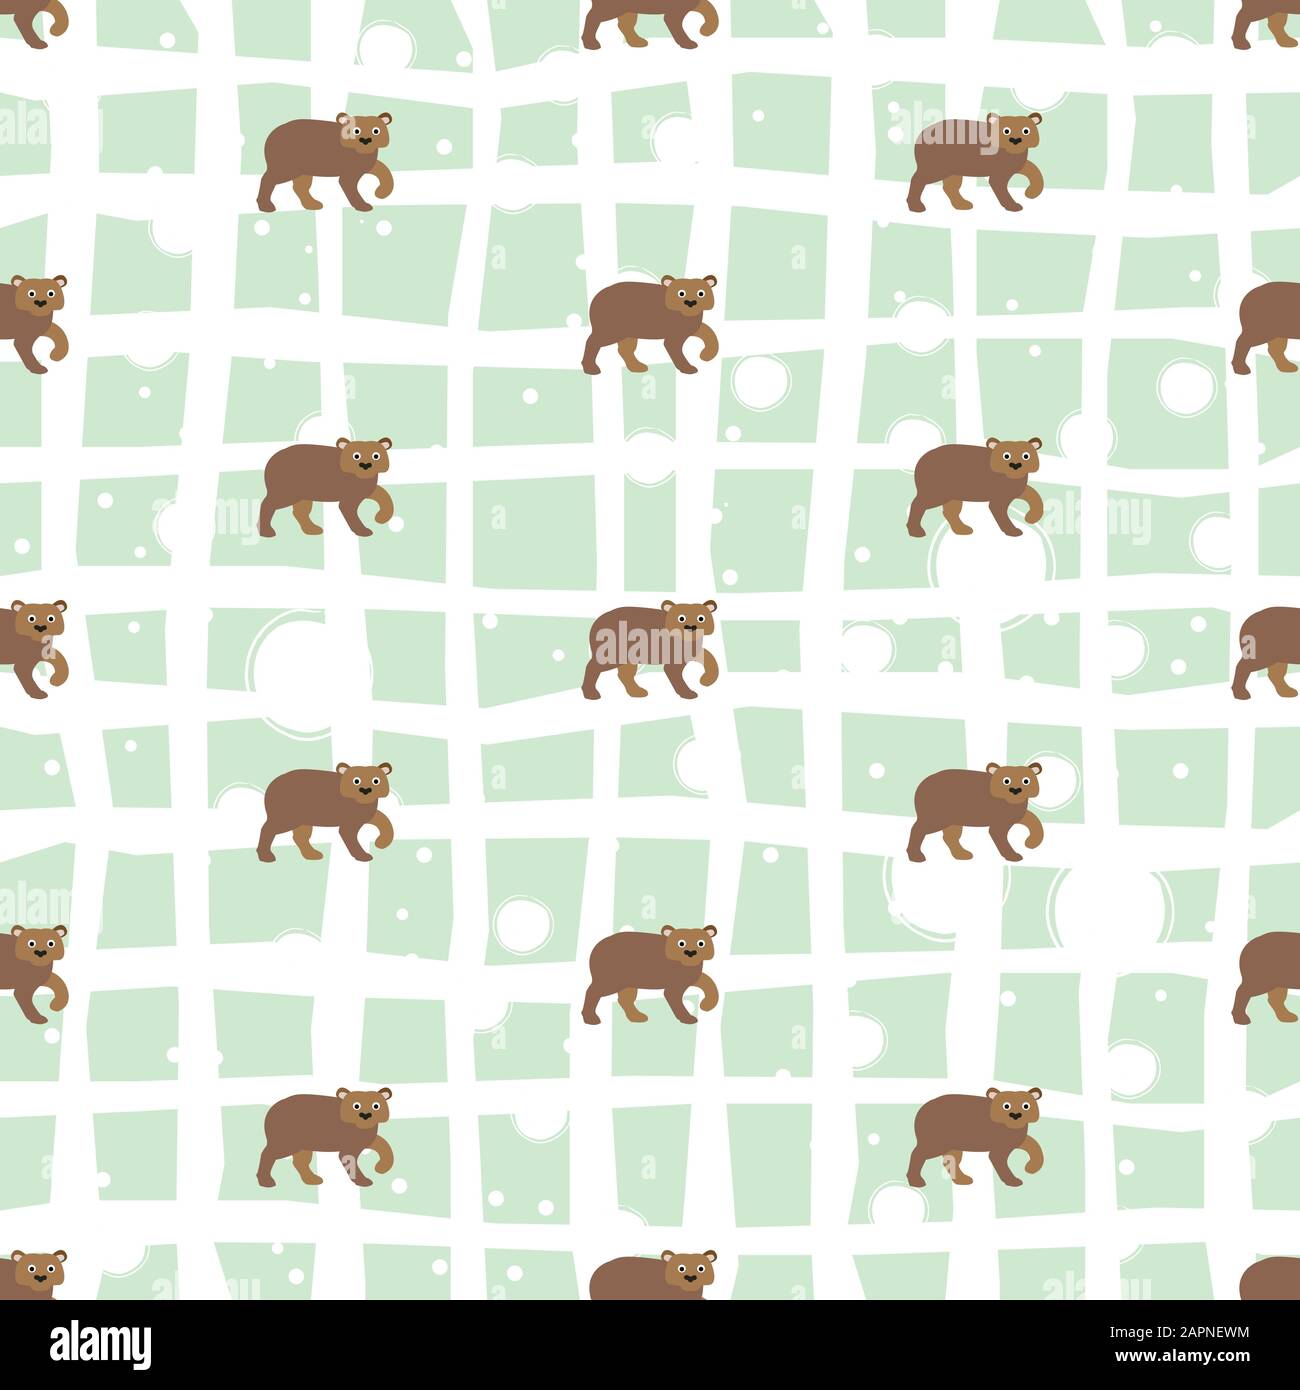 Seamless pattern with brown bears pattern  Vector Illustration Stock Vector